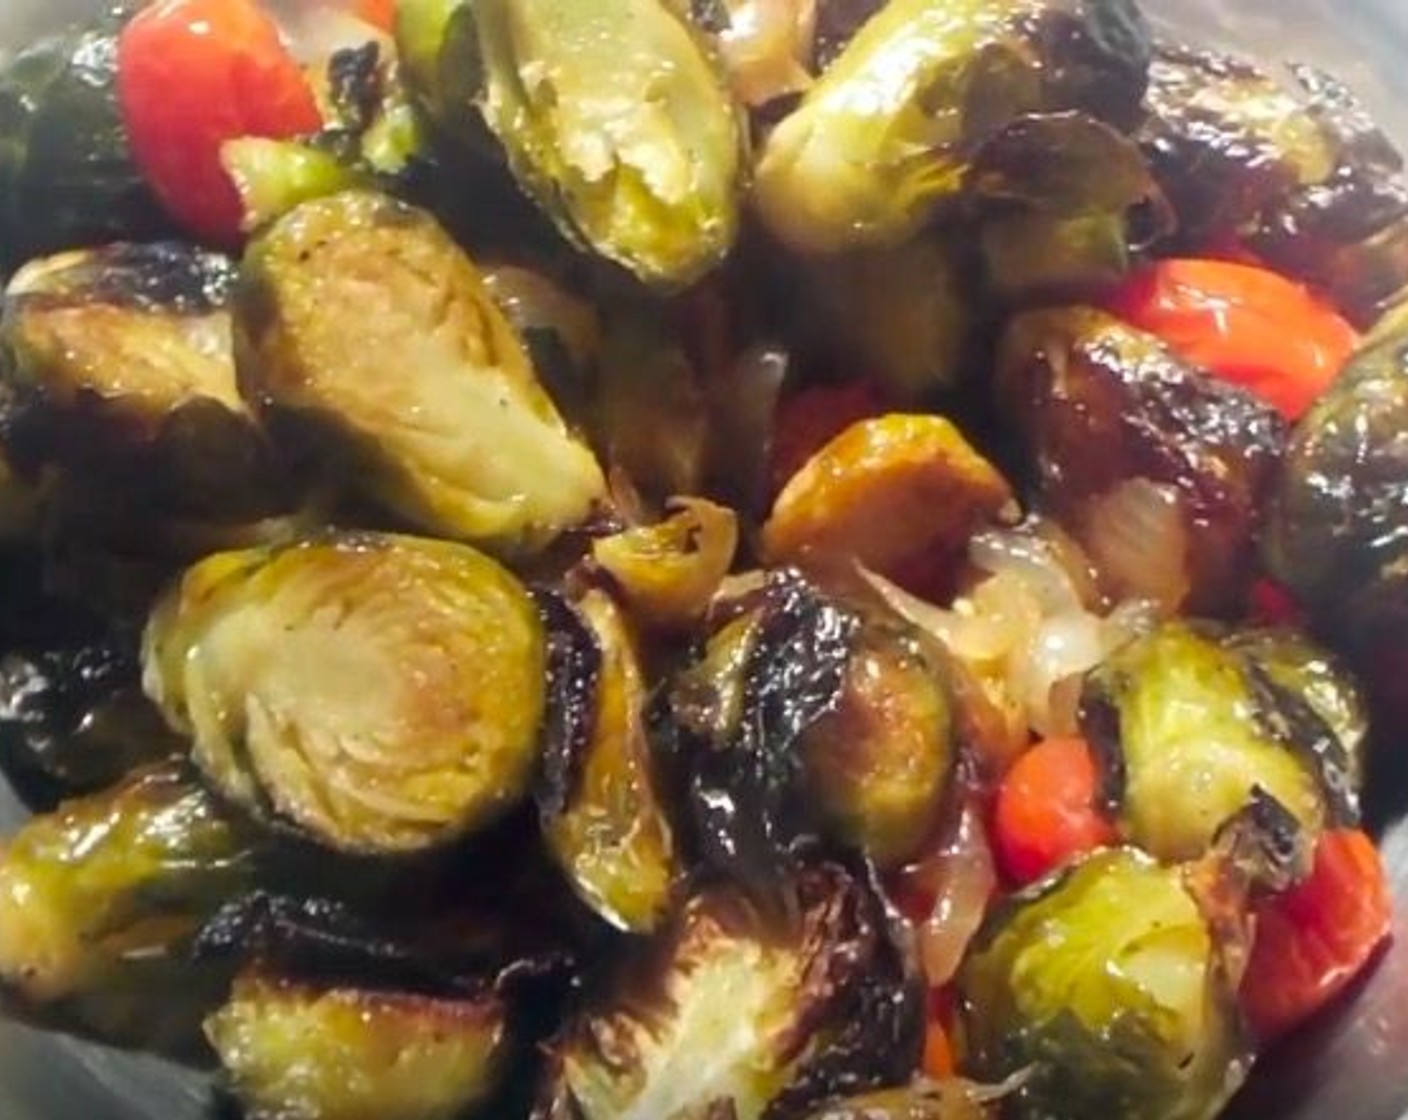 Marc's Oven Roasted Brussel Sprouts and Tomatoes